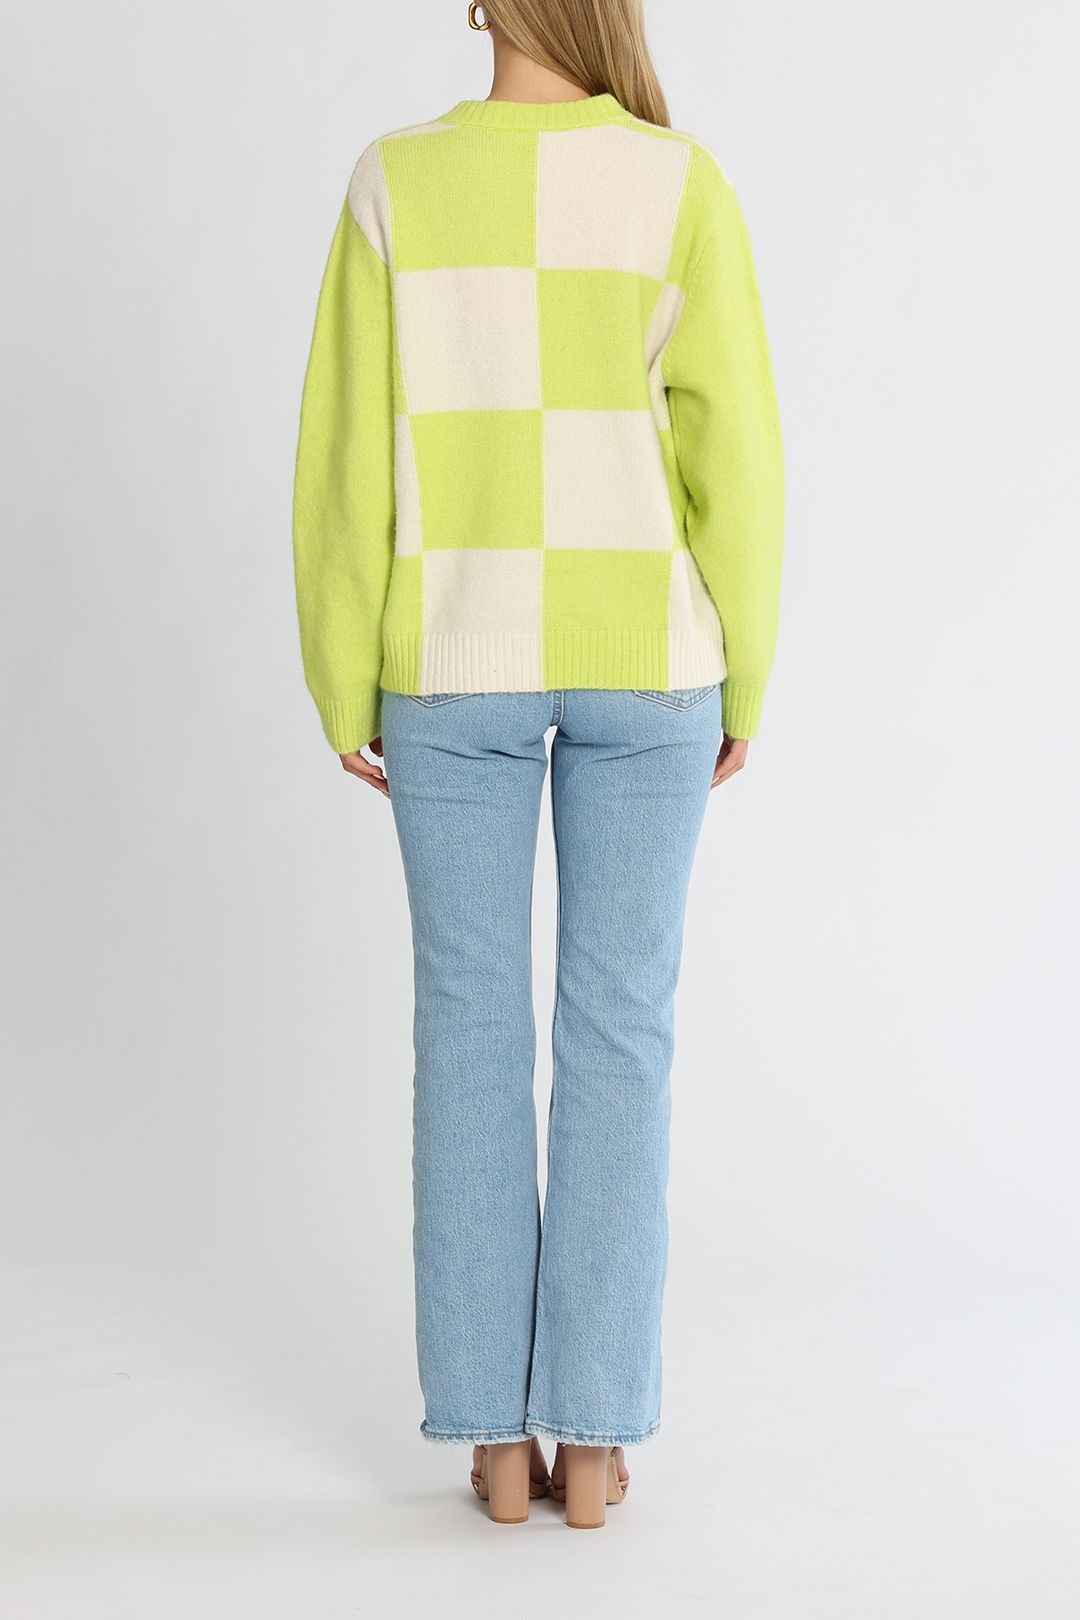 Baum und Pferdgarten Cecilee Check Knit Lime Relaxed Fit